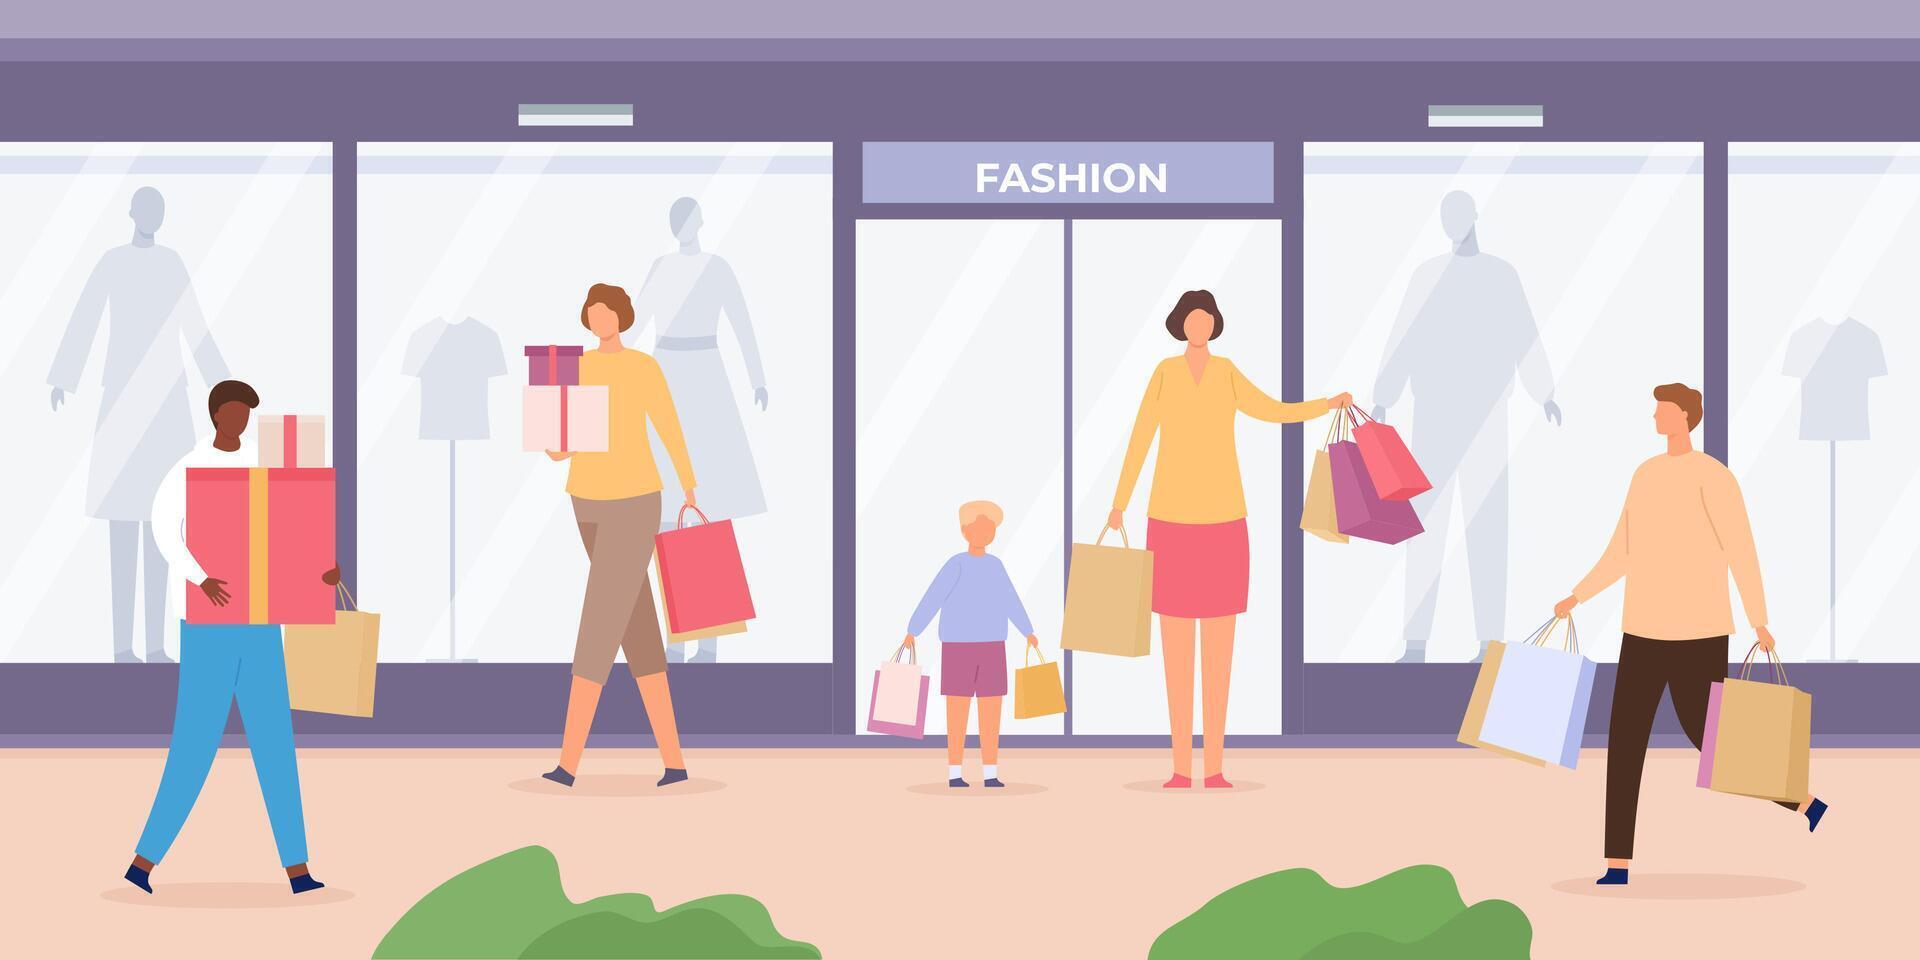 Shop street with people. Urban landscape with store showcases with mannequins and customers walking with shopping bags, flat vector concept